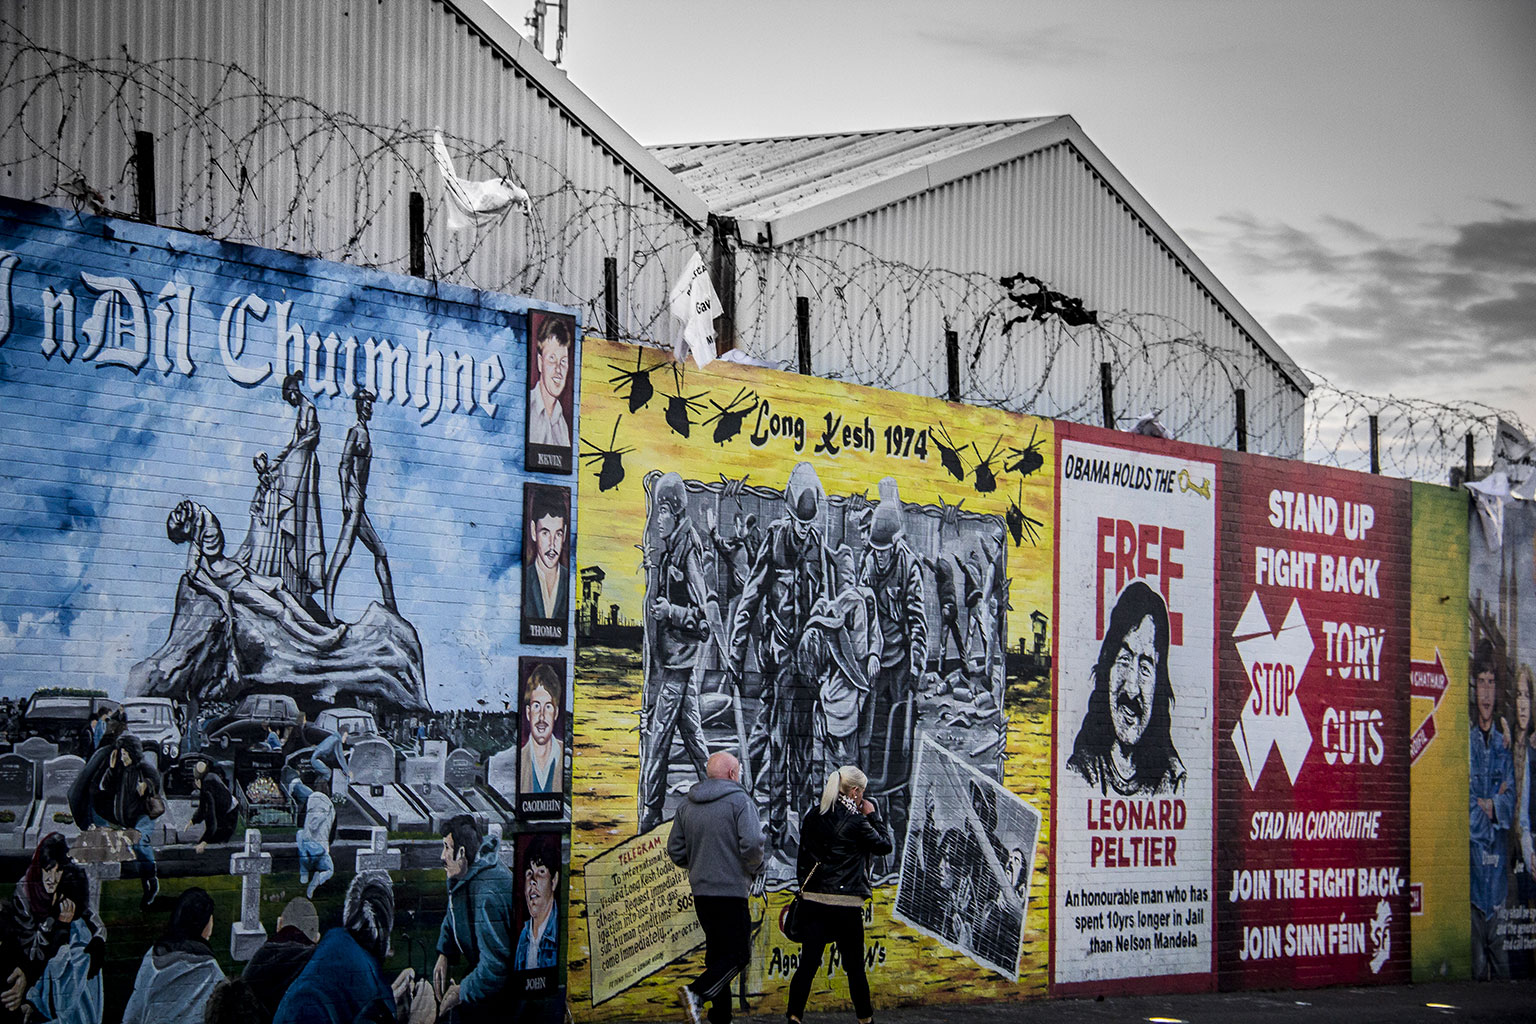 Photograph of a peace wall in Belfast by Diego López